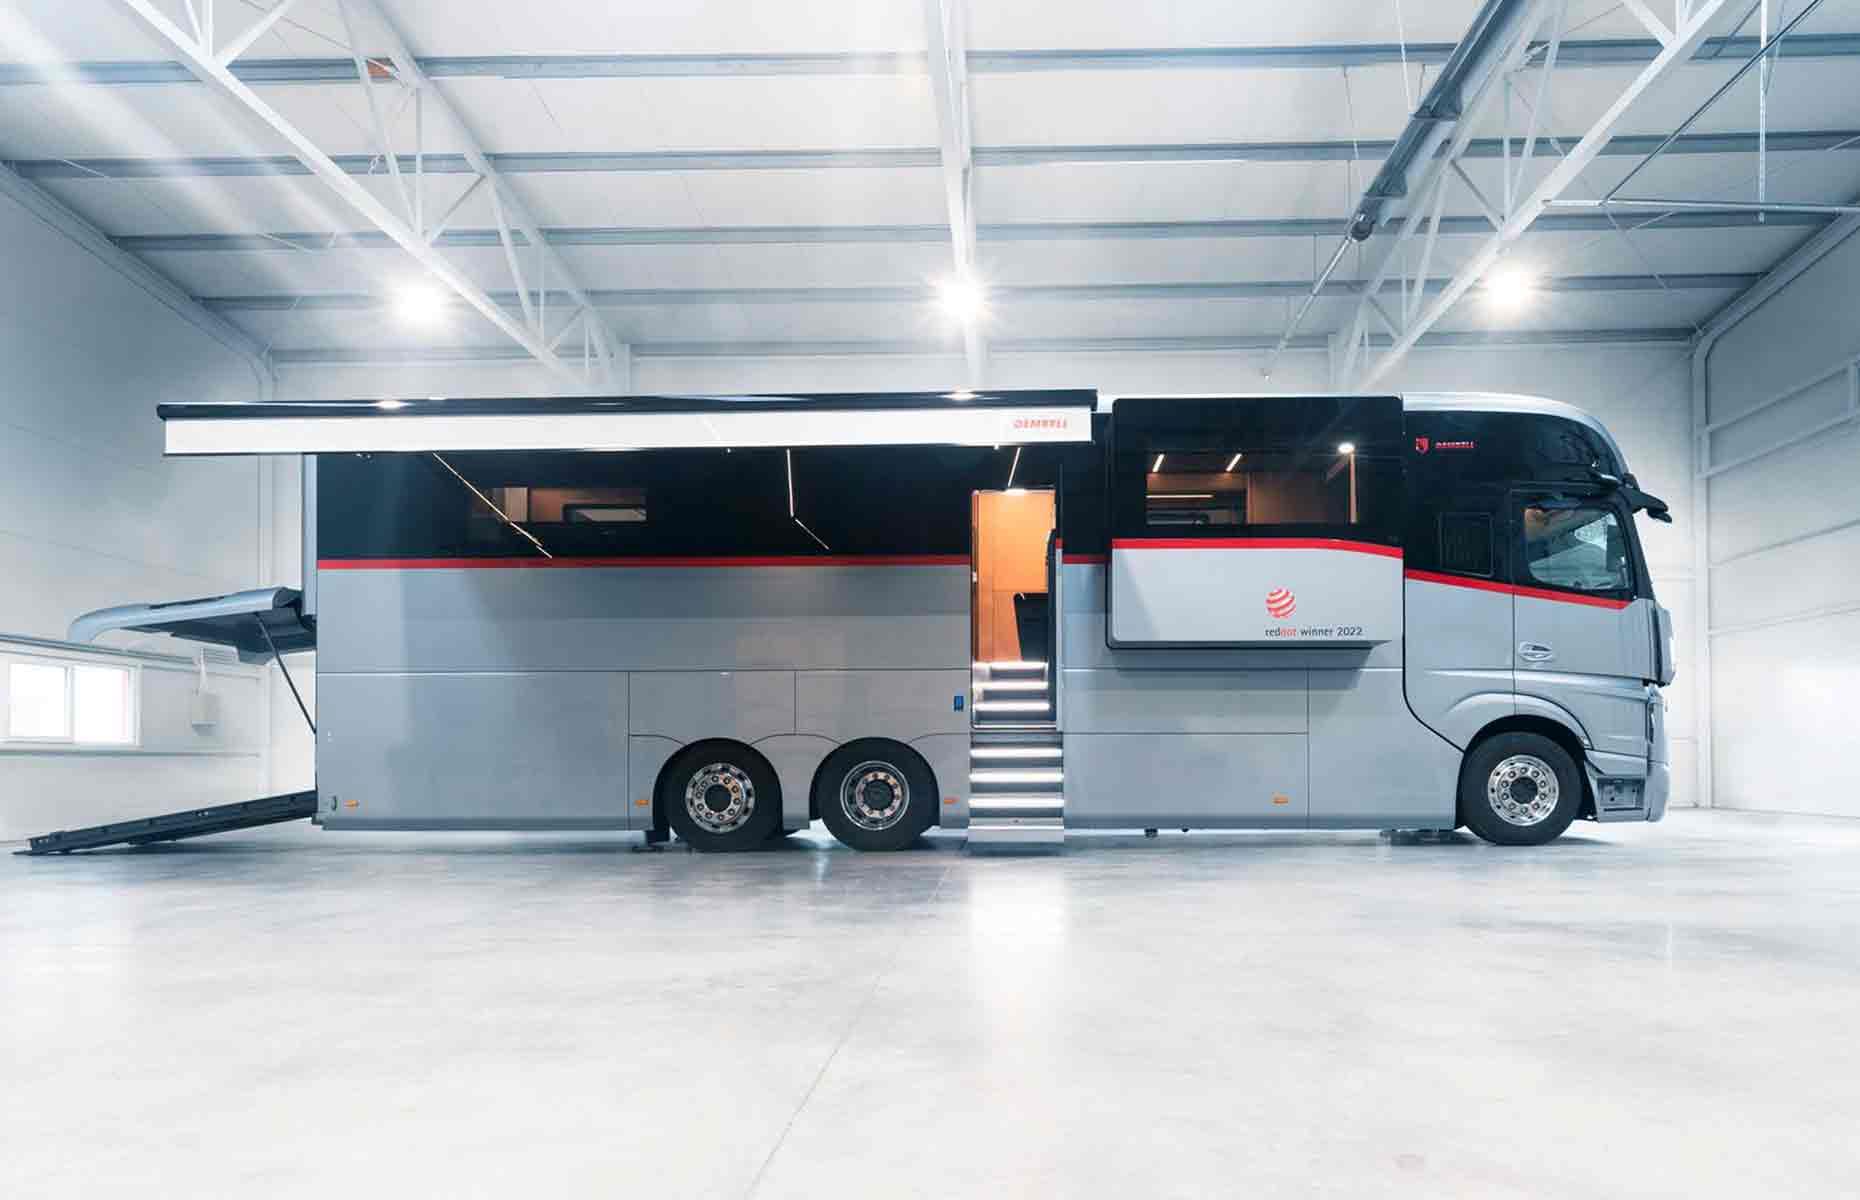 <p>A relatively new name in the world of high-end RVs, <a href="https://www.dembell.com/models/large-garage-modell">Dembell</a> is making waves with its state-of-the-art range of plush land yachts.</p>  <p>Its latest iteration, which was unveiled at the 2022 Dusseldorf Caravan Show before being launched to the general public in the summer of 2023, is decked out with some seriously lavish amenities. </p>  <p>With a <a href="https://www.autoevolution.com/news/the-dembell-motorhome-m-with-large-garage-is-a-futuristic-15-million-landyacht-216105.html">price tag</a> of $1.5 million, the futuristic model is built on a Mercedes-Benz Actros Gigaspace chassis and measures just over 29 feet long and 8.2 feet wide. A sleek aluminum panel across the exterior disguises the RV's party trick – two nifty, hydraulic slide-outs, which expand the interior by a generous 323 square feet.  </p>